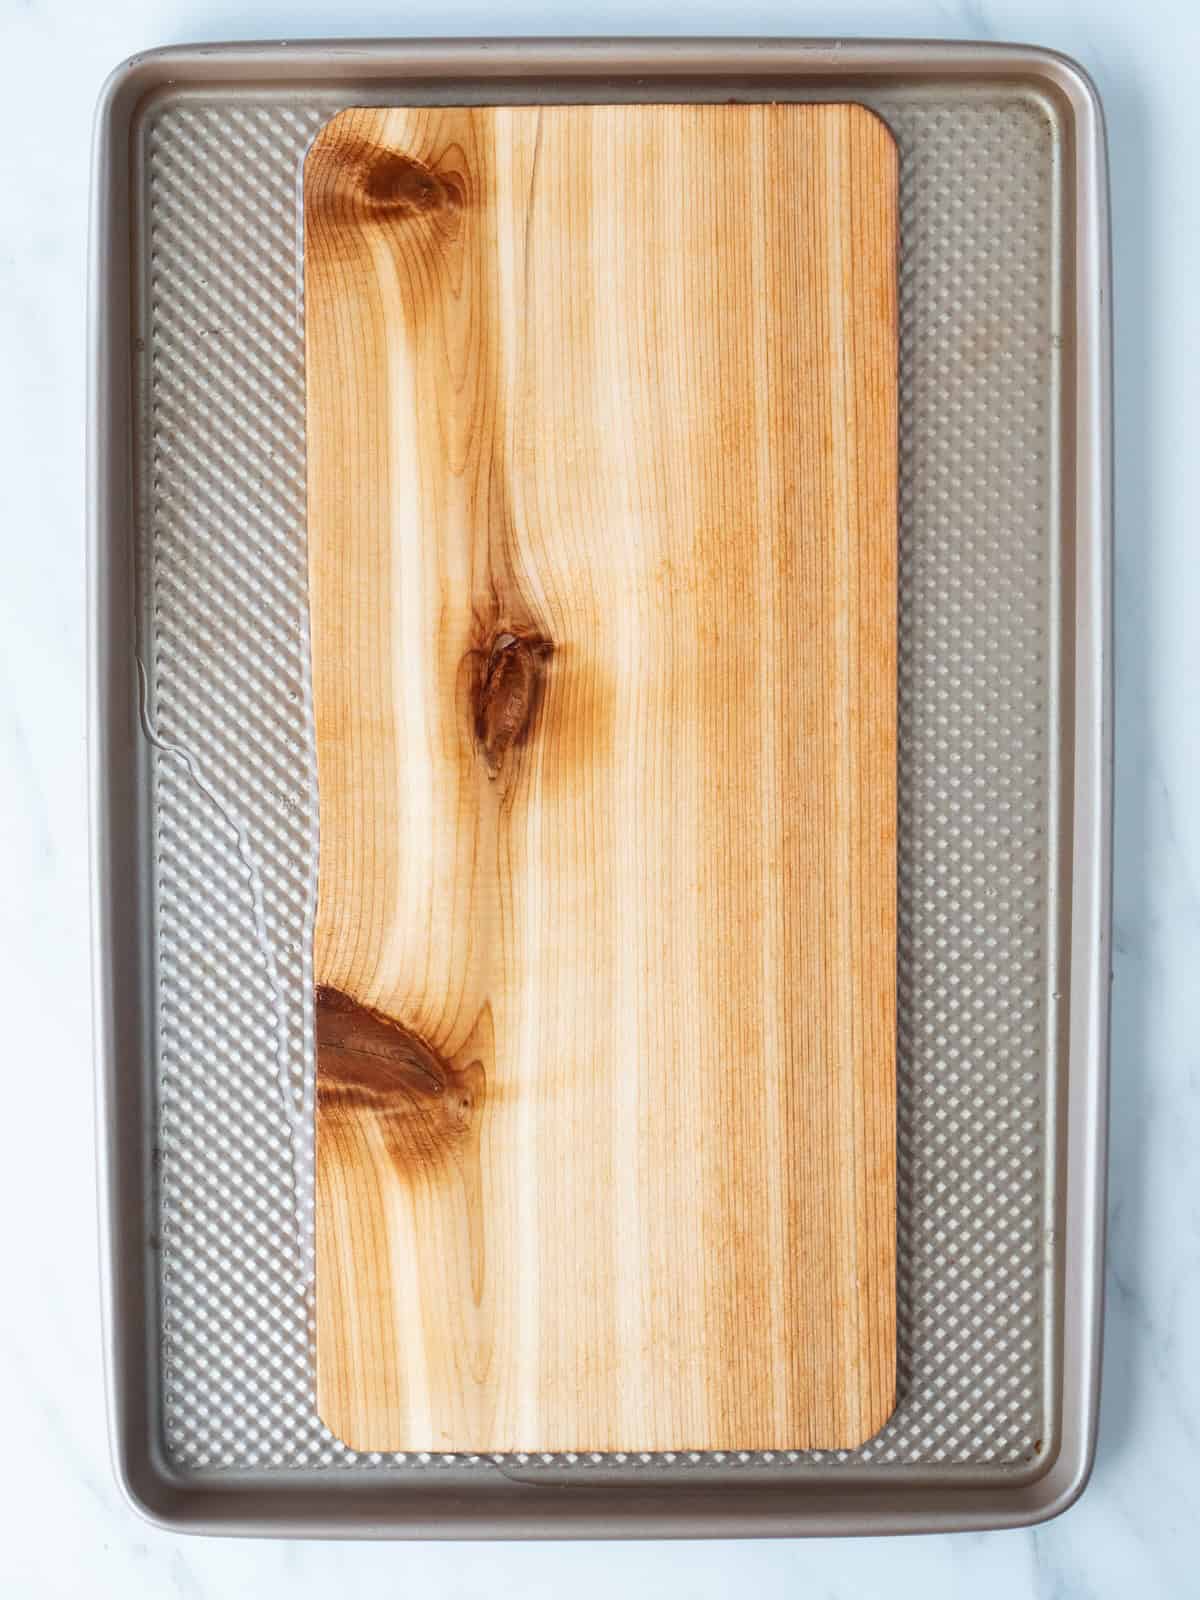 A baking sheet with a cedar plank placed in it.